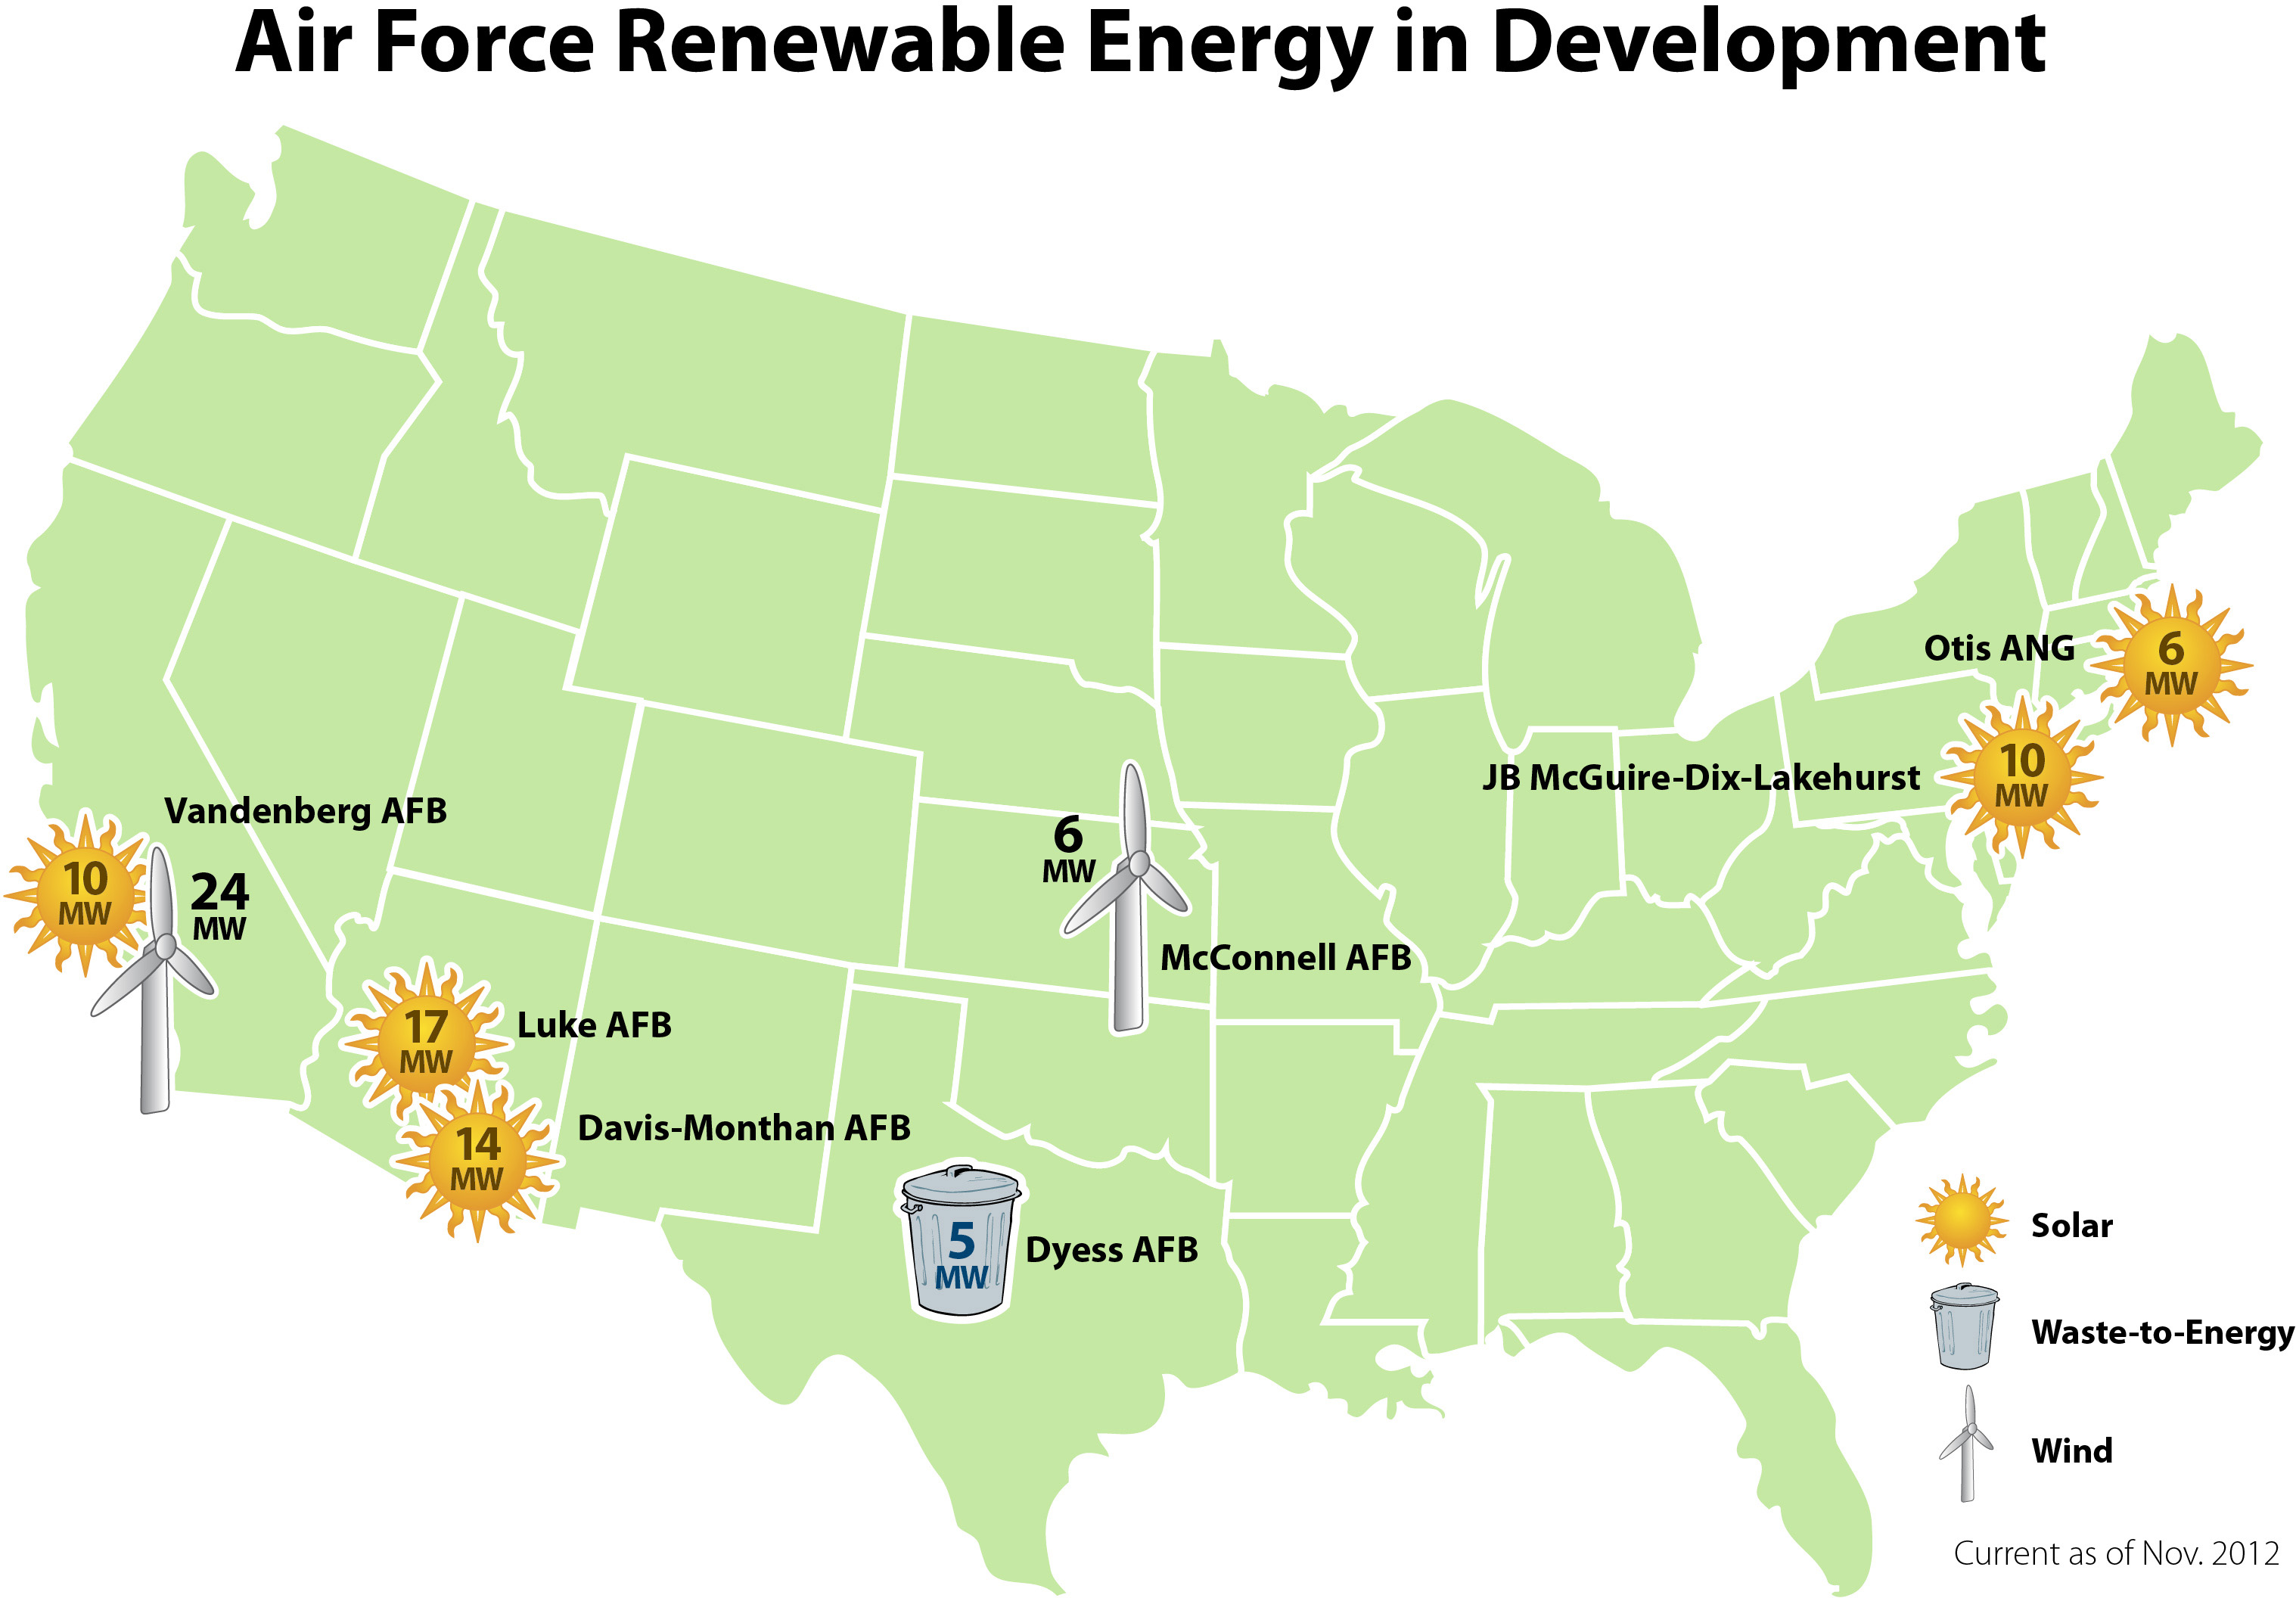 Air Force Renewable Energy Projects in Development Map